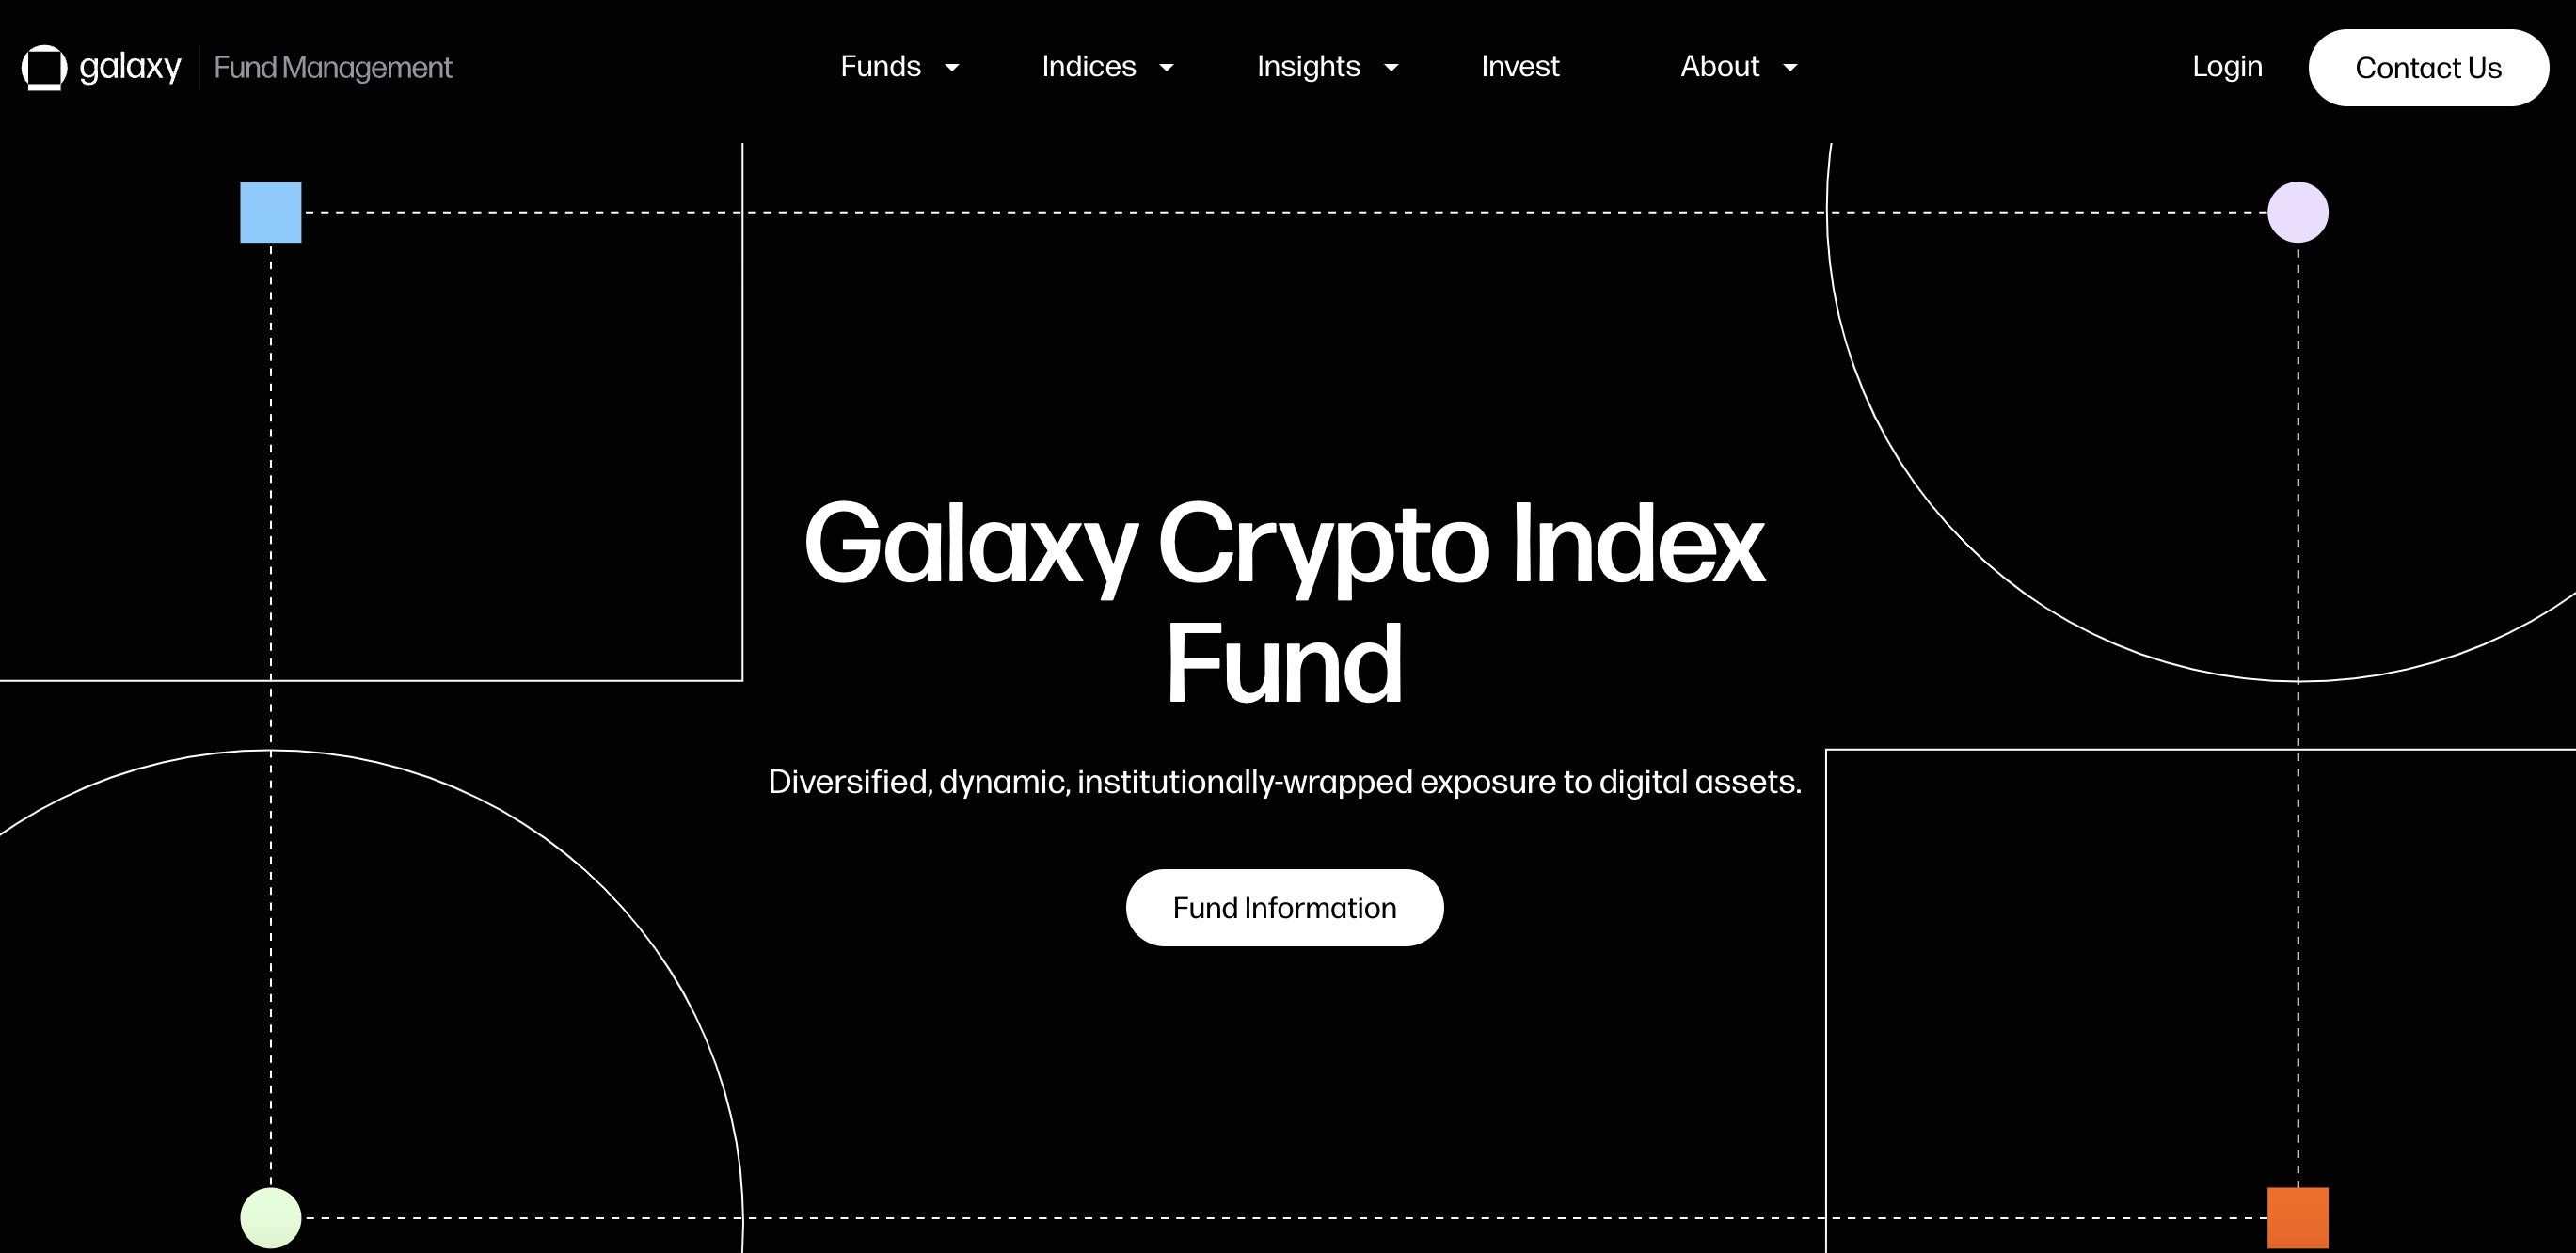 Galaxy Crypto Index Fund home page